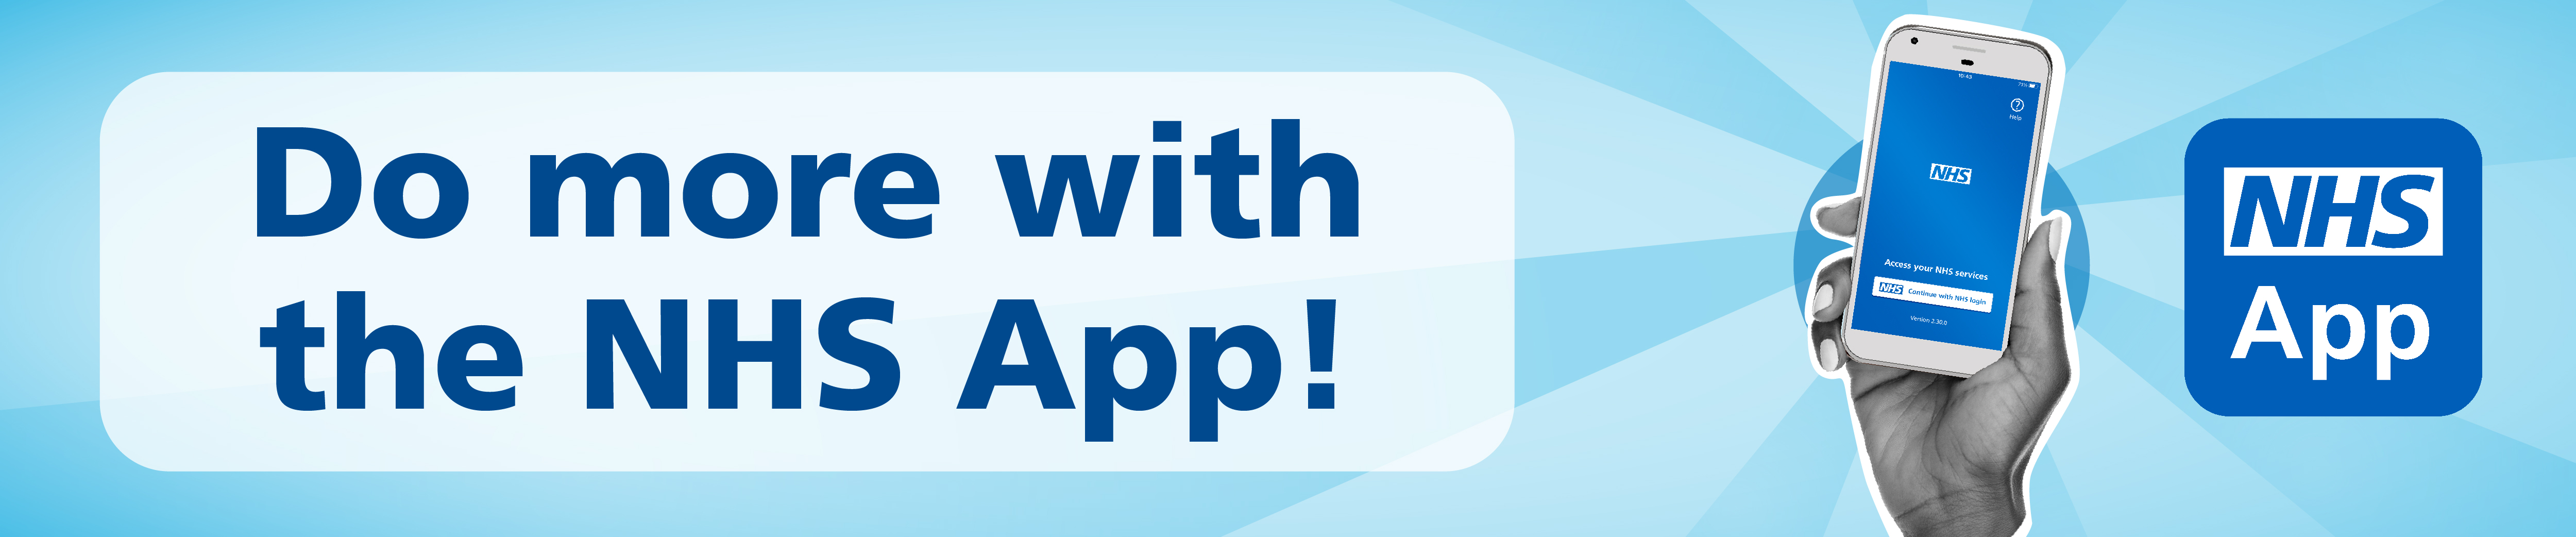 Download the NHS App to access a range of NHS services